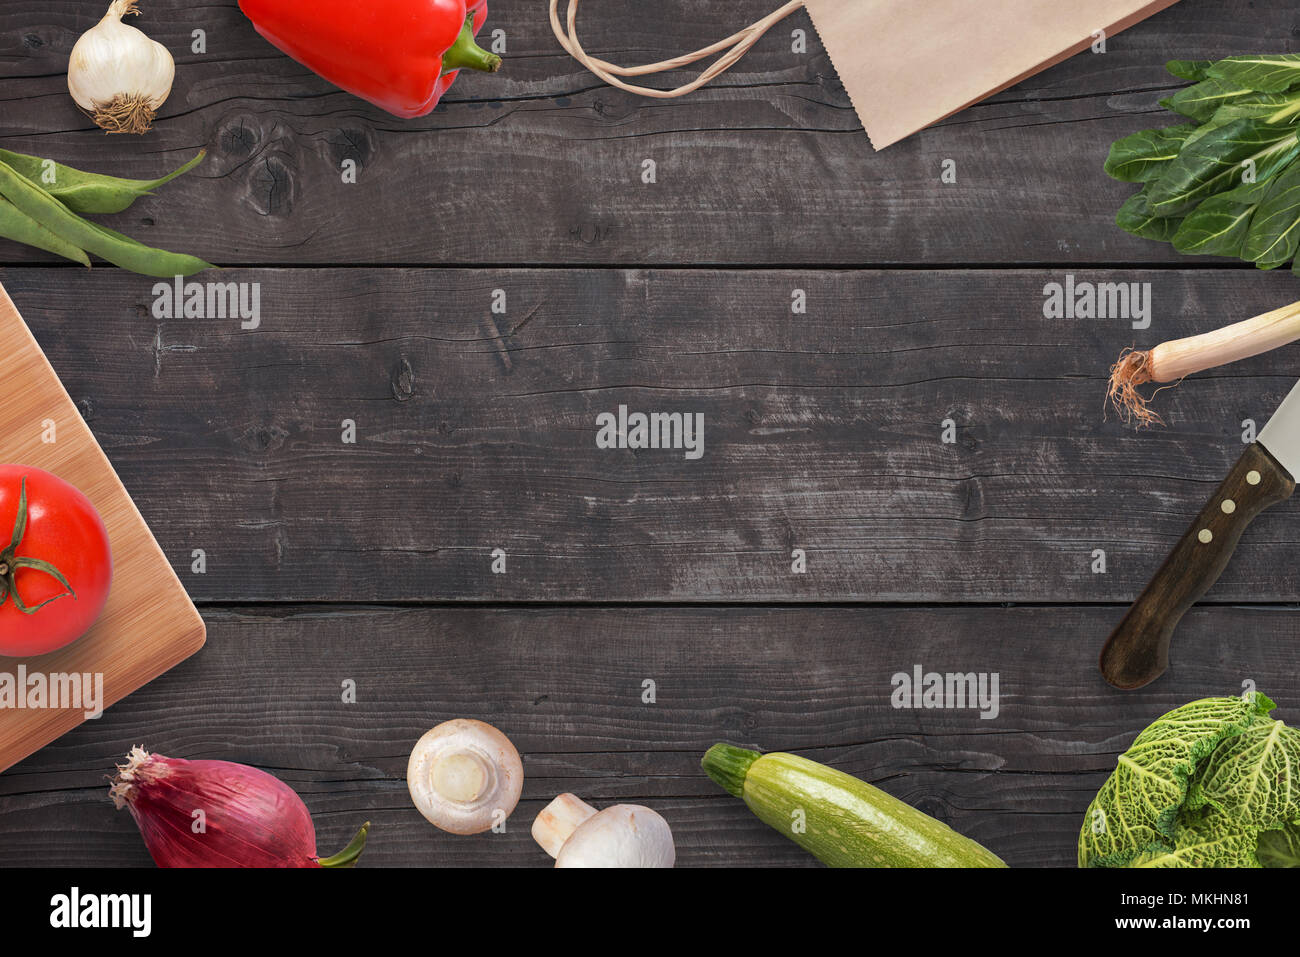 Preparing meals on a kitchen table with lots of vegetables. Black wooden desk with free space for text in background. Stock Photo